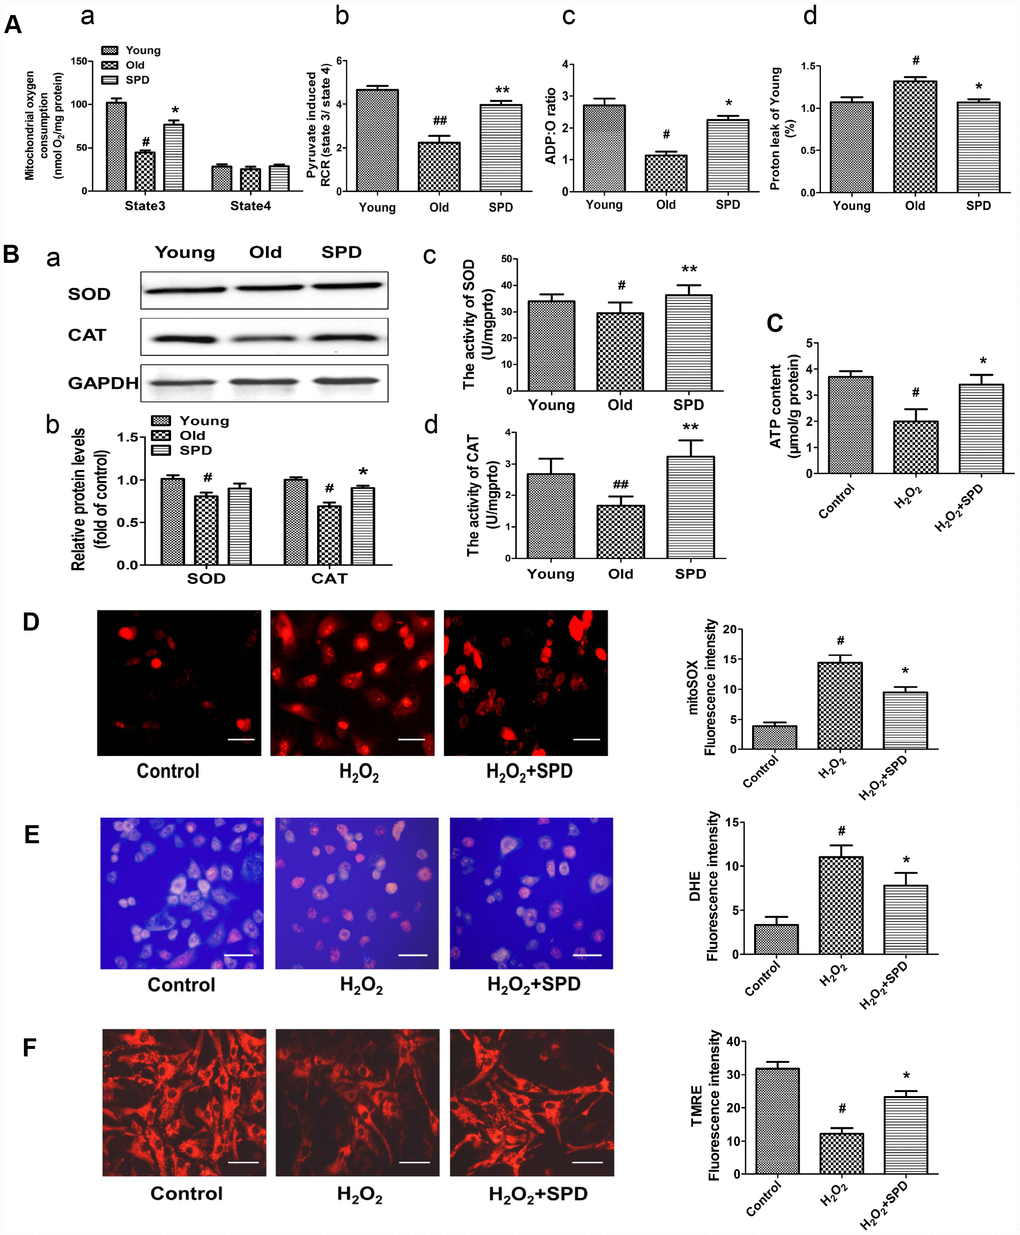 Effect of SPD on mitochondrial respiration and ROS accumulation in the aged heart and in H2O2-treated cardiomyocytes. (A) Mitochondrial oxidative phosphorylation (OXPHOS) efficiency was evaluated in the rat myocardium. Measurements included mitochondrial oxygen consumption States 3 and 4 (a), respiratory control rate (RCR) (b), P/O ratio (c), and proton leakage (d). Respiration was induced with pyruvate/malate (5 mM each) as energizing substrates and ADP (200 μM) to initiate State 3 respiration (n = 8). (B) Western blot analysis of SOD and CAT expression (a, b), and colorimetric detection SOD and CAT activity (c, d). n = 4 for protein expression and n = 8 for activity assay. # P ## P * P ** P C) ATP content of cardiomyocytes measured by luminometry in NRCMs (n = 8). (D) Superoxide production in mitochondria detected by MitoSOX staining in H9C2 cells. (E) ROS production in H9C2 cells detected by DHE in H9C2 cells. (F) Mitochondrial transmembrane potential (ΔΨm) detected by TMRE in H9C2 cells. Quantification of the mean fluorescence intensity of MitoSOX, DHE, and TMRE are displayed on the right side of the graphs (n = 8). # P ## P * P 2O2 group, ** P 2O2 group.